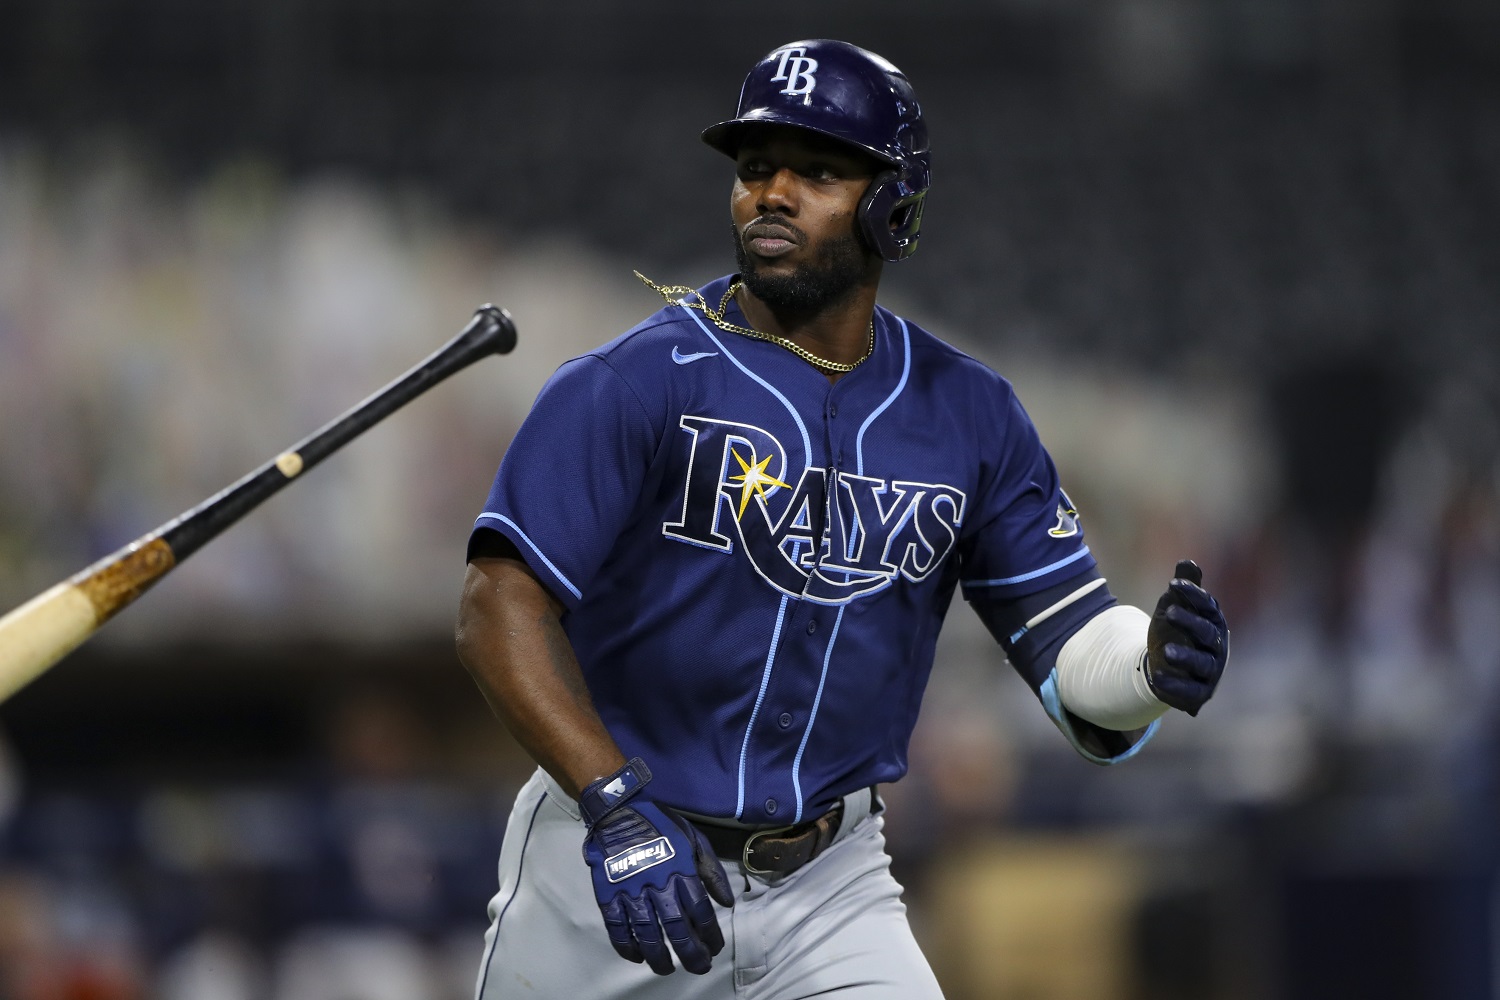 Randy Arozarena Once Made $4 a Month Playing Baseball and Is Now Making History for the Tampa Bay Rays